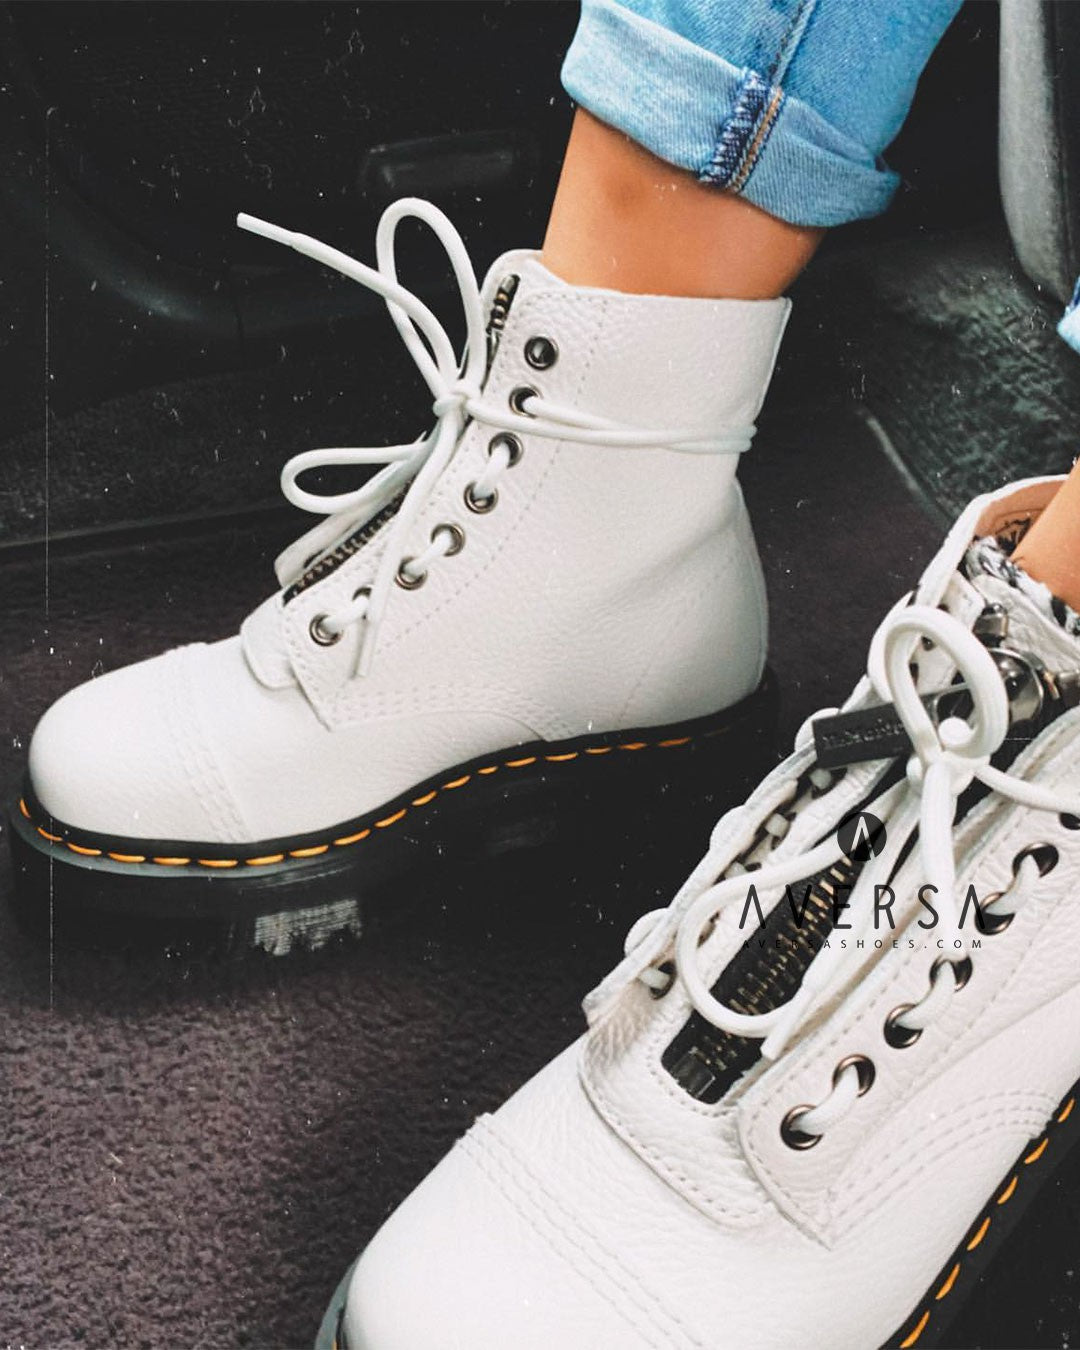 OF - Dr. Martens Sinclair White Aunt Sally